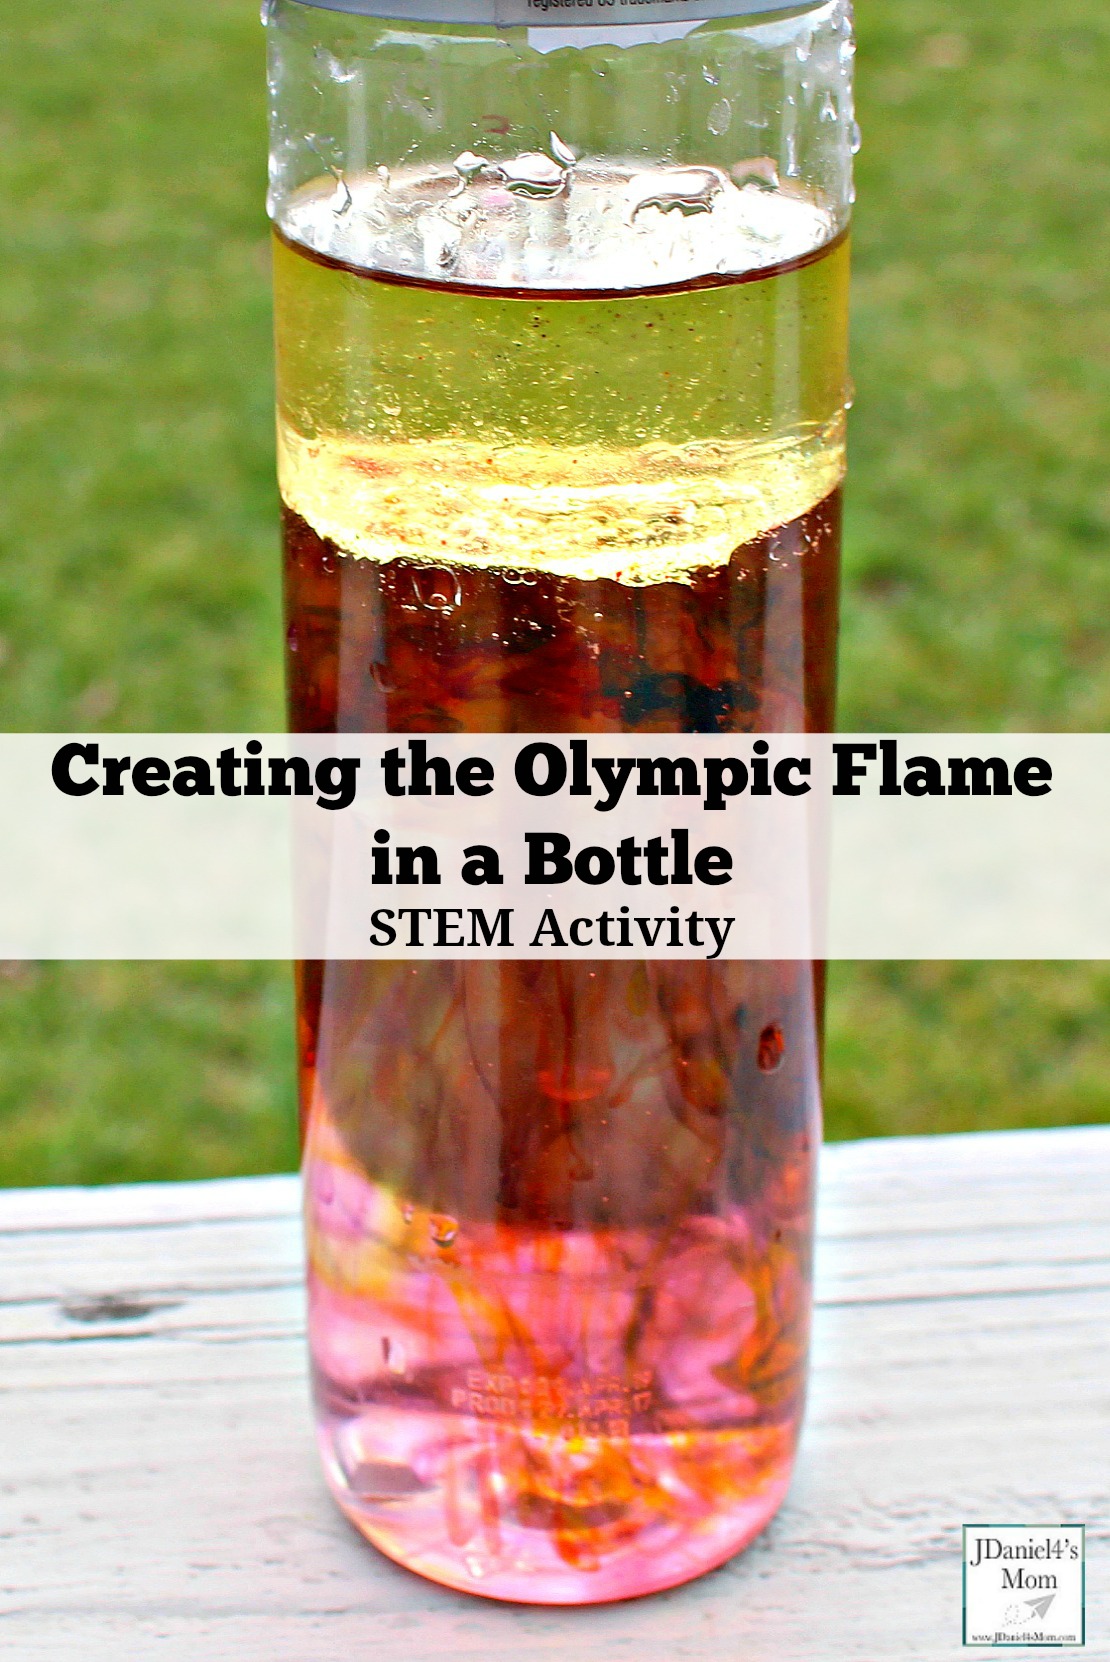 Creating the Olympic Flame in a Bottle STEM Activity - Children at home and students at school will have fun exploring how food coloring separates from oil to cascade into water like the flickers of an Olympic flame. There is a free recording printable your children can use to share why they think this happens and the colors they see in their jars.